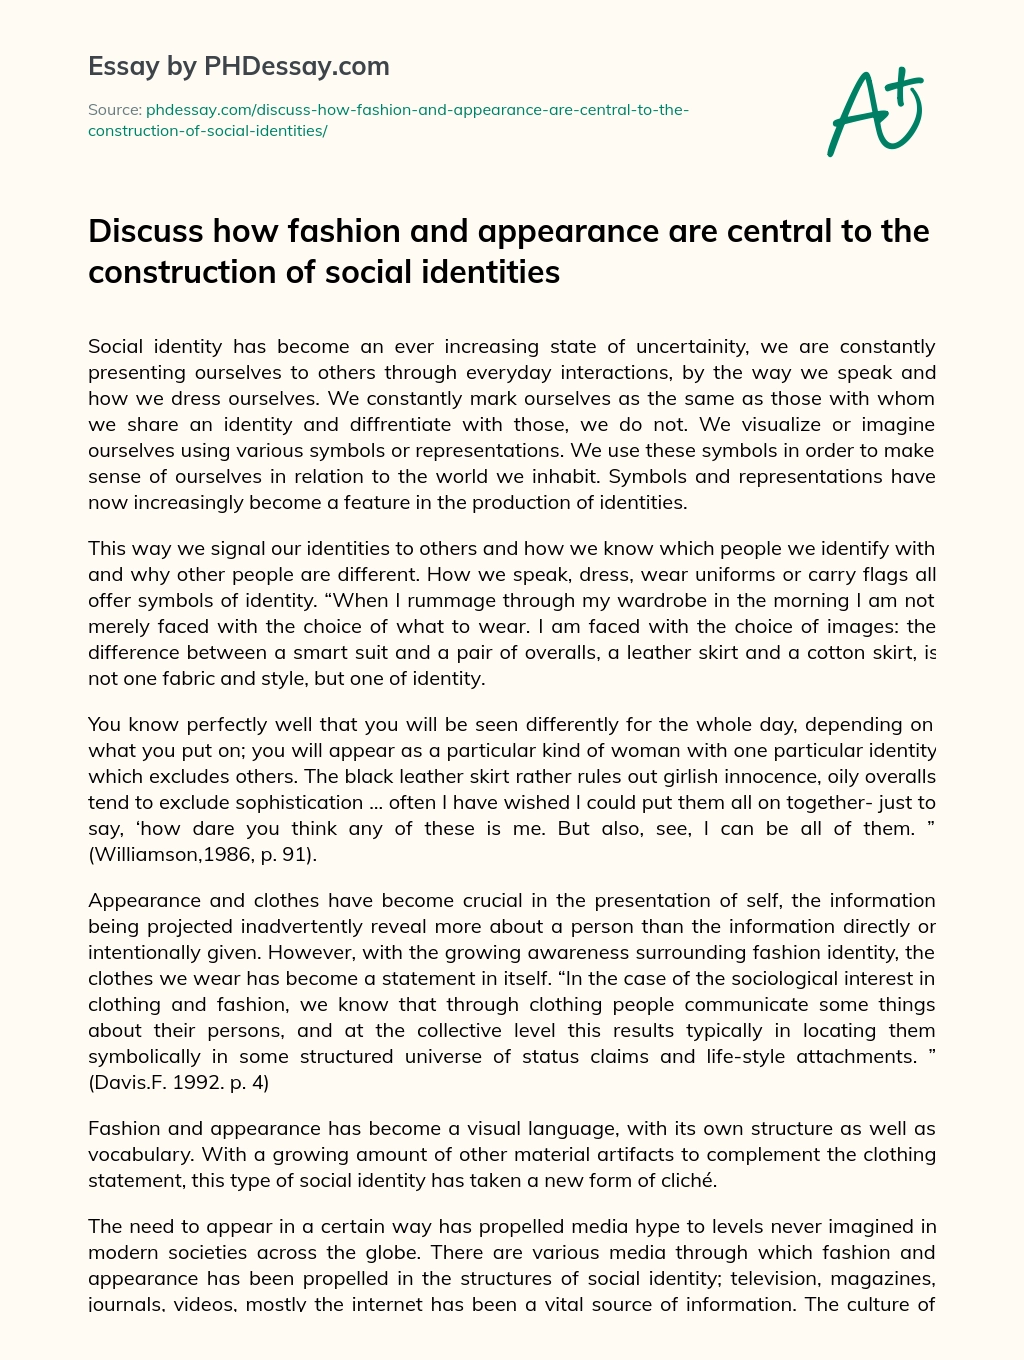 Discuss how fashion and appearance are central to the construction of social identities essay